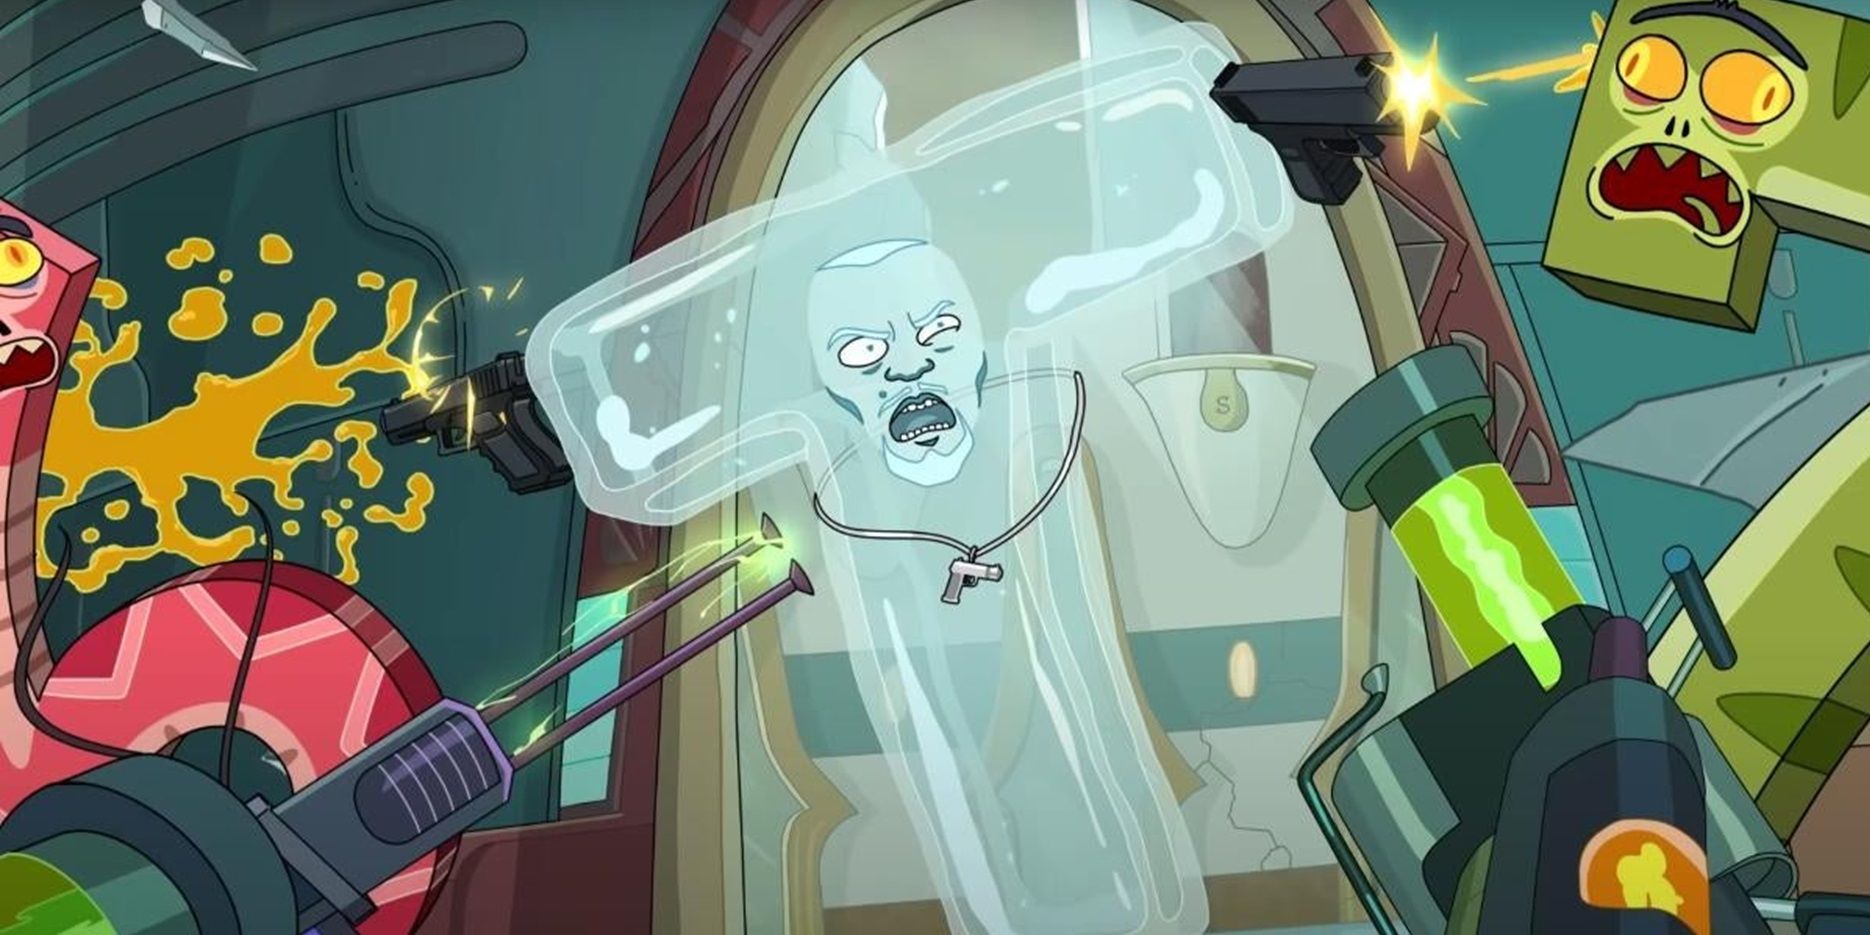 Water-T shoots numbers in Rick and Morty